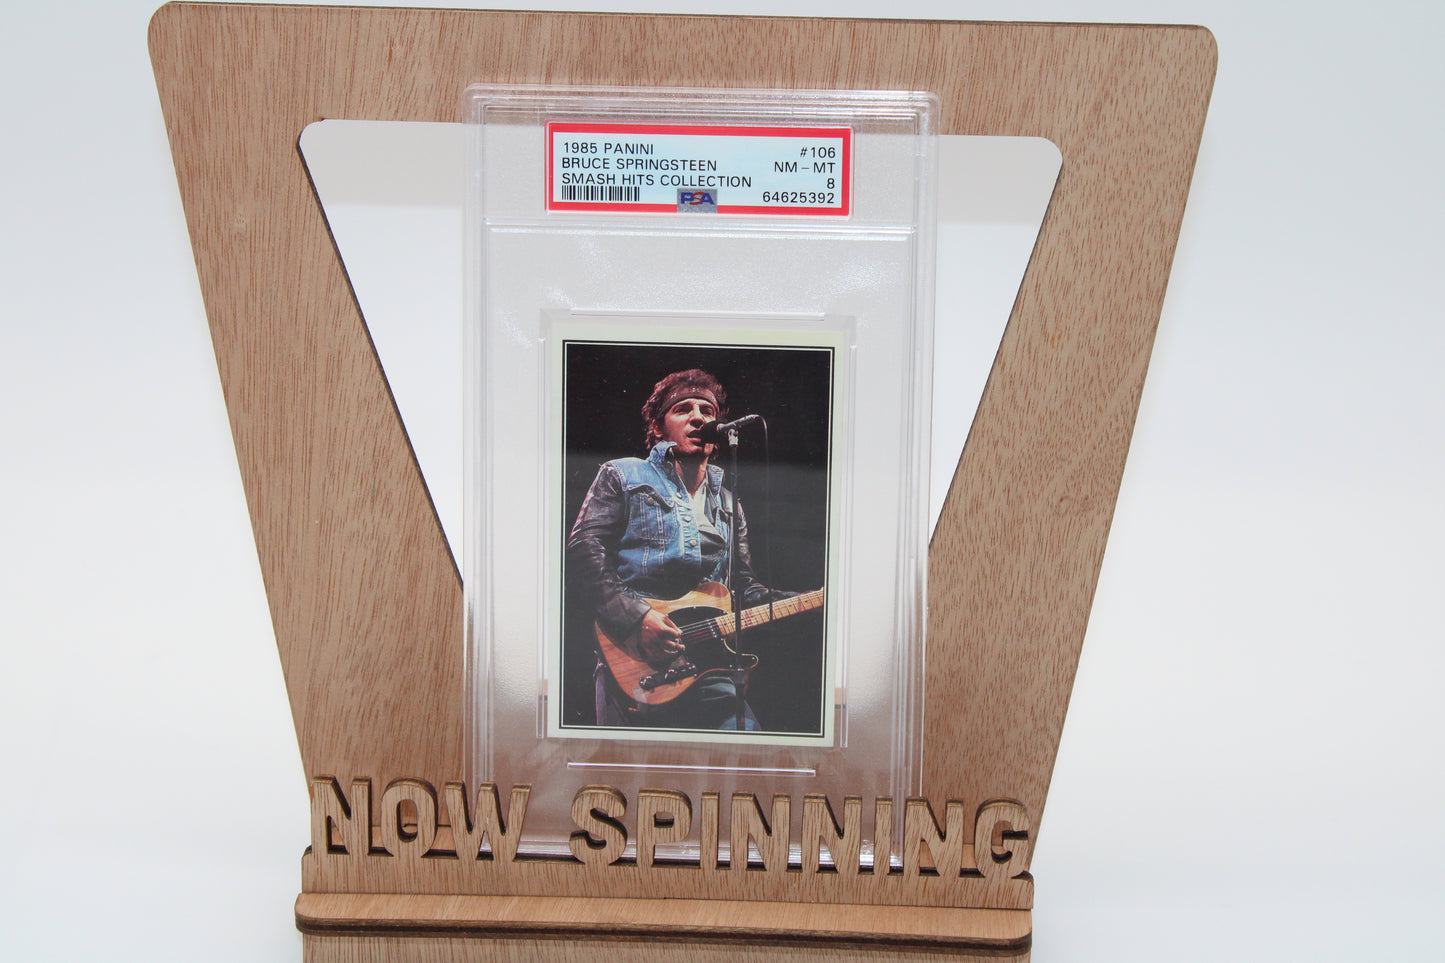 Bruce Springsteen Panini Smash Hits Collectible 1985 Card #106 - PSA Graded 8 / none higher